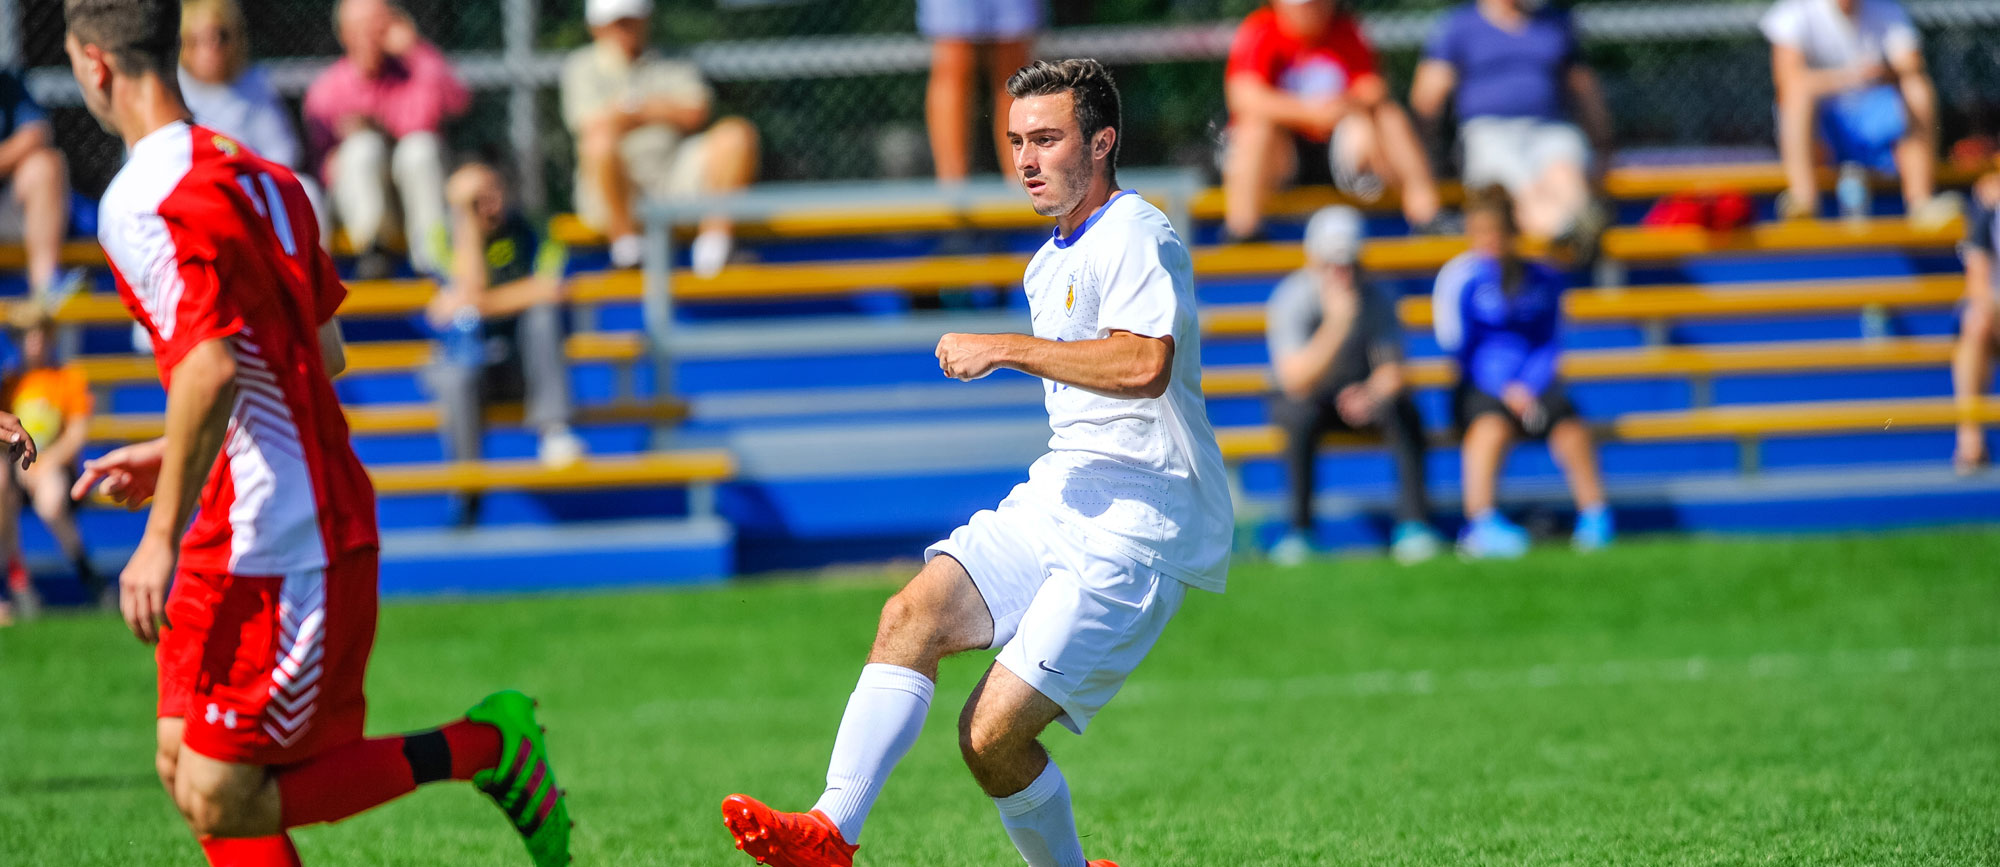 Golden Bears Knock Off Top-Seeded Gulls in Penalty Kick Shootout, Advance to CCC Title Game